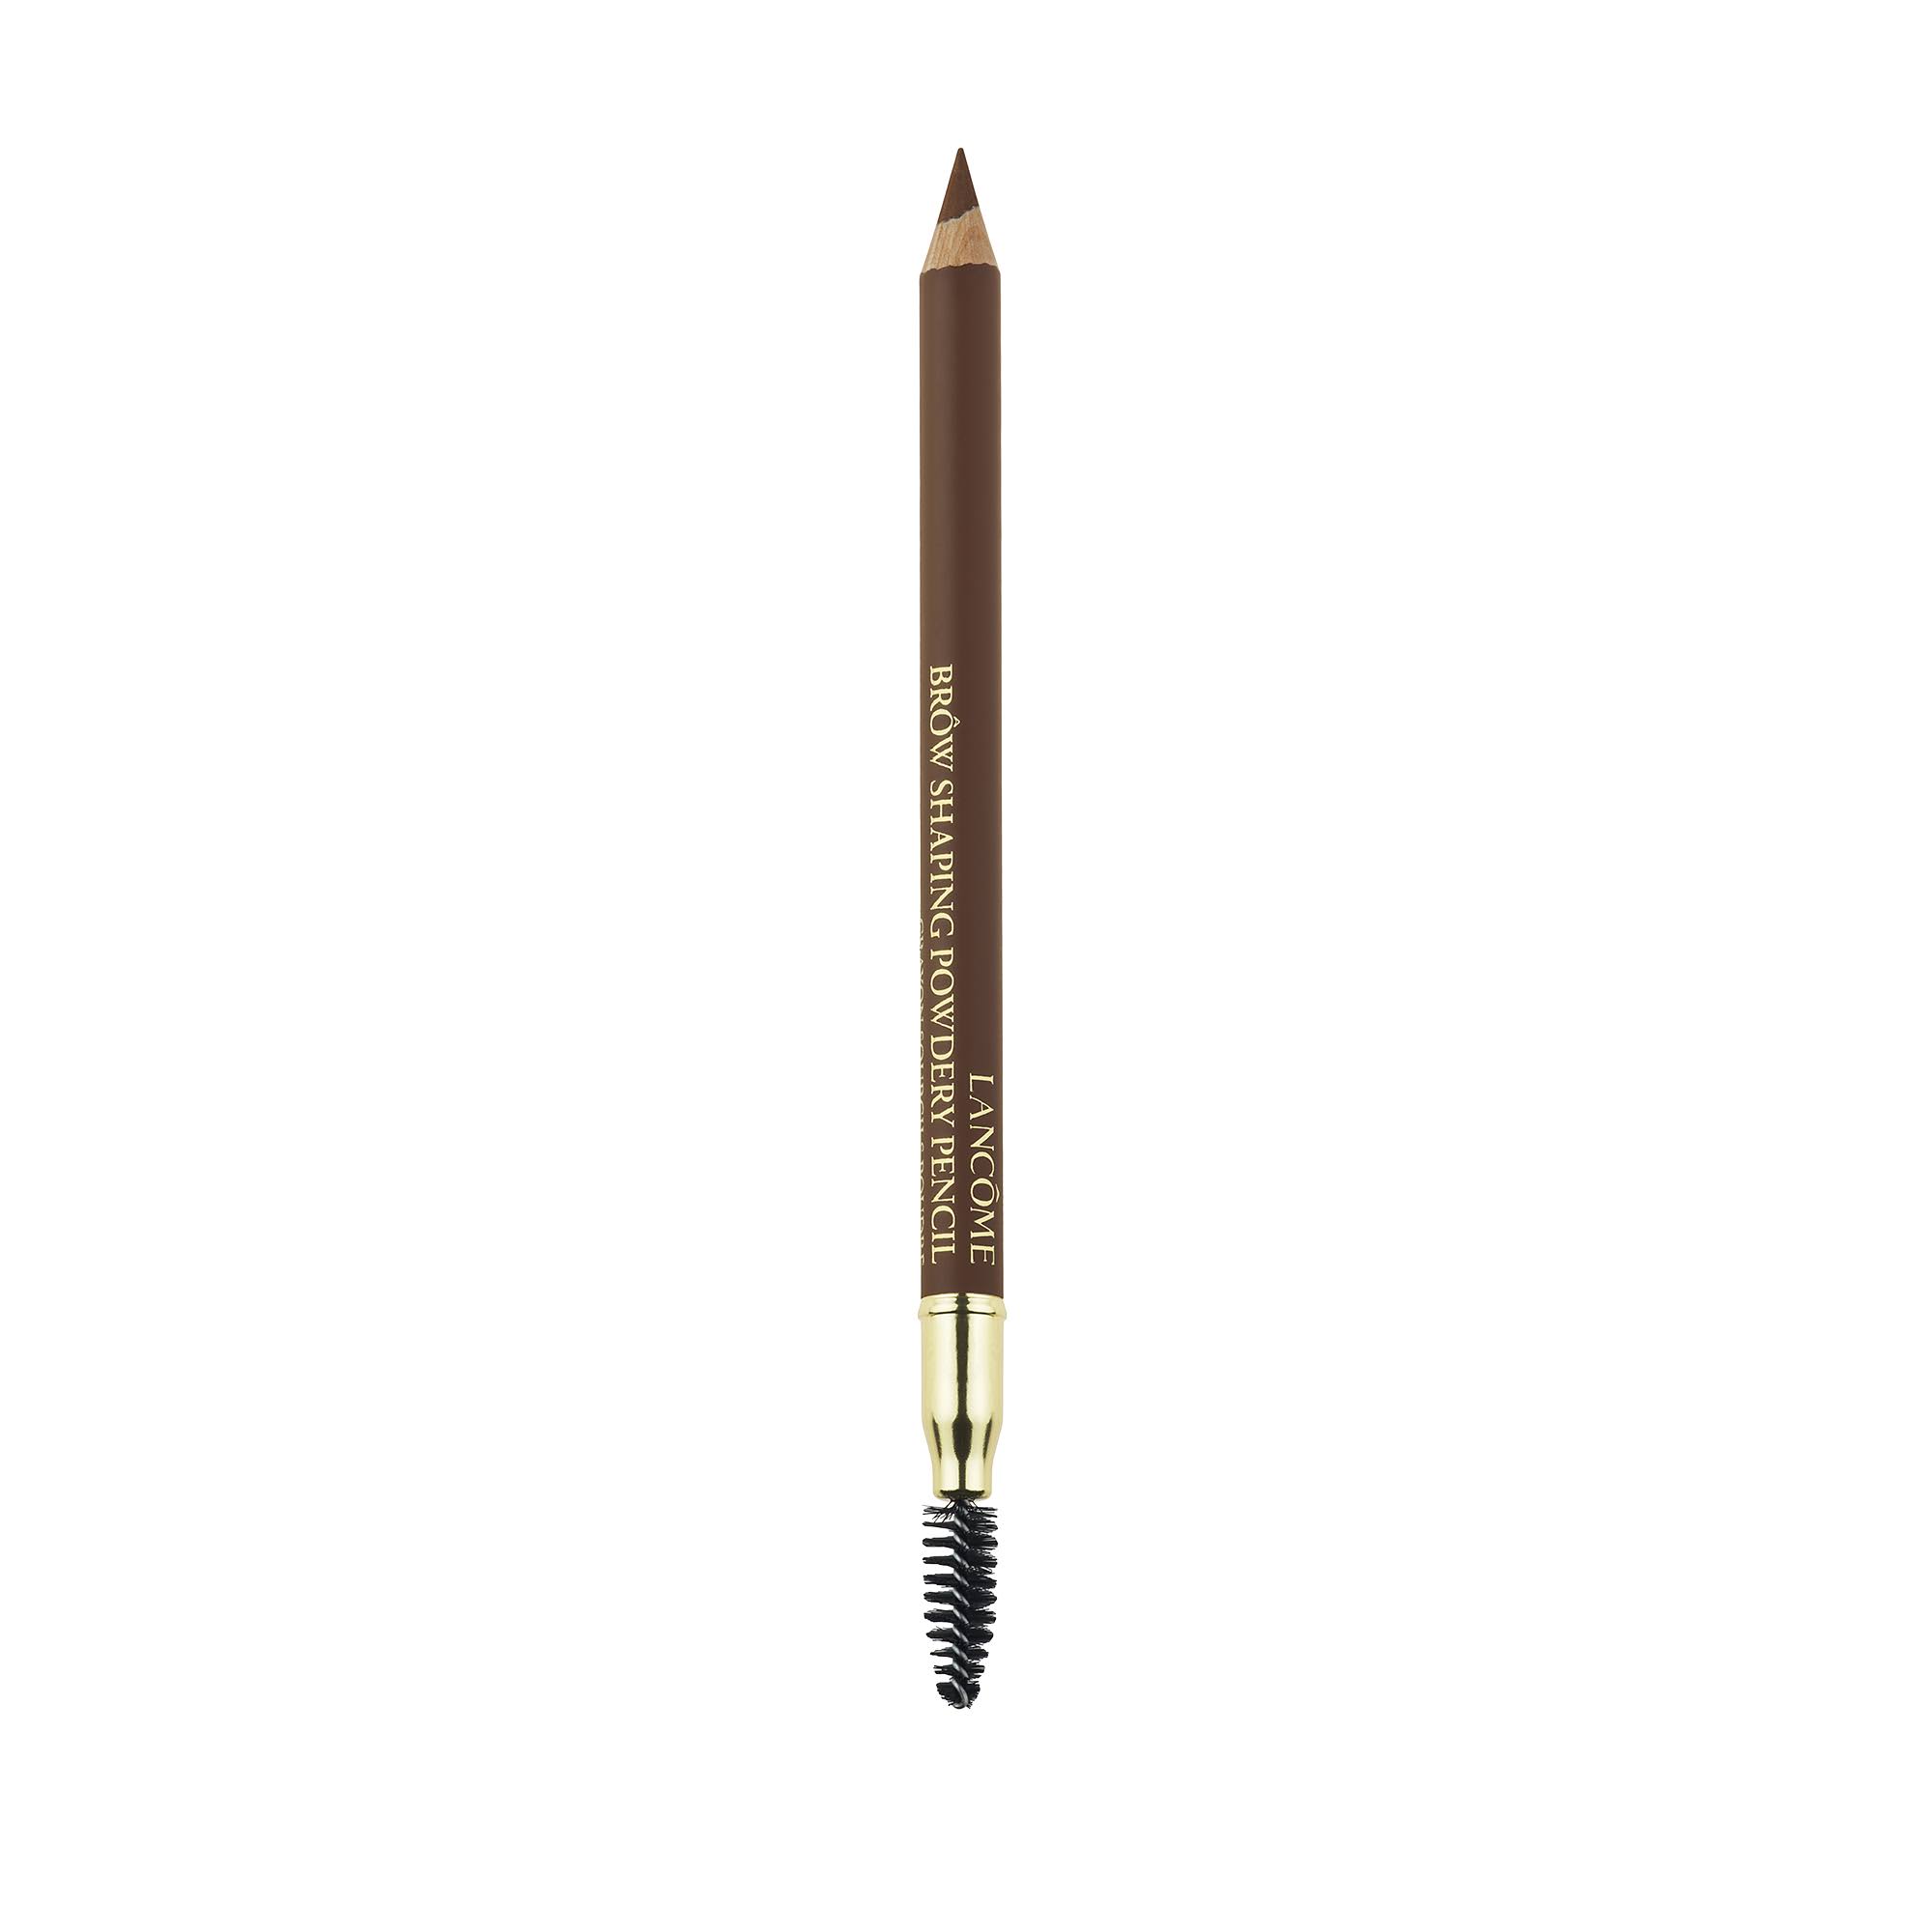 Lancome Brow Shaping Powdery Pencil - 05 Chestnut, 1.19g